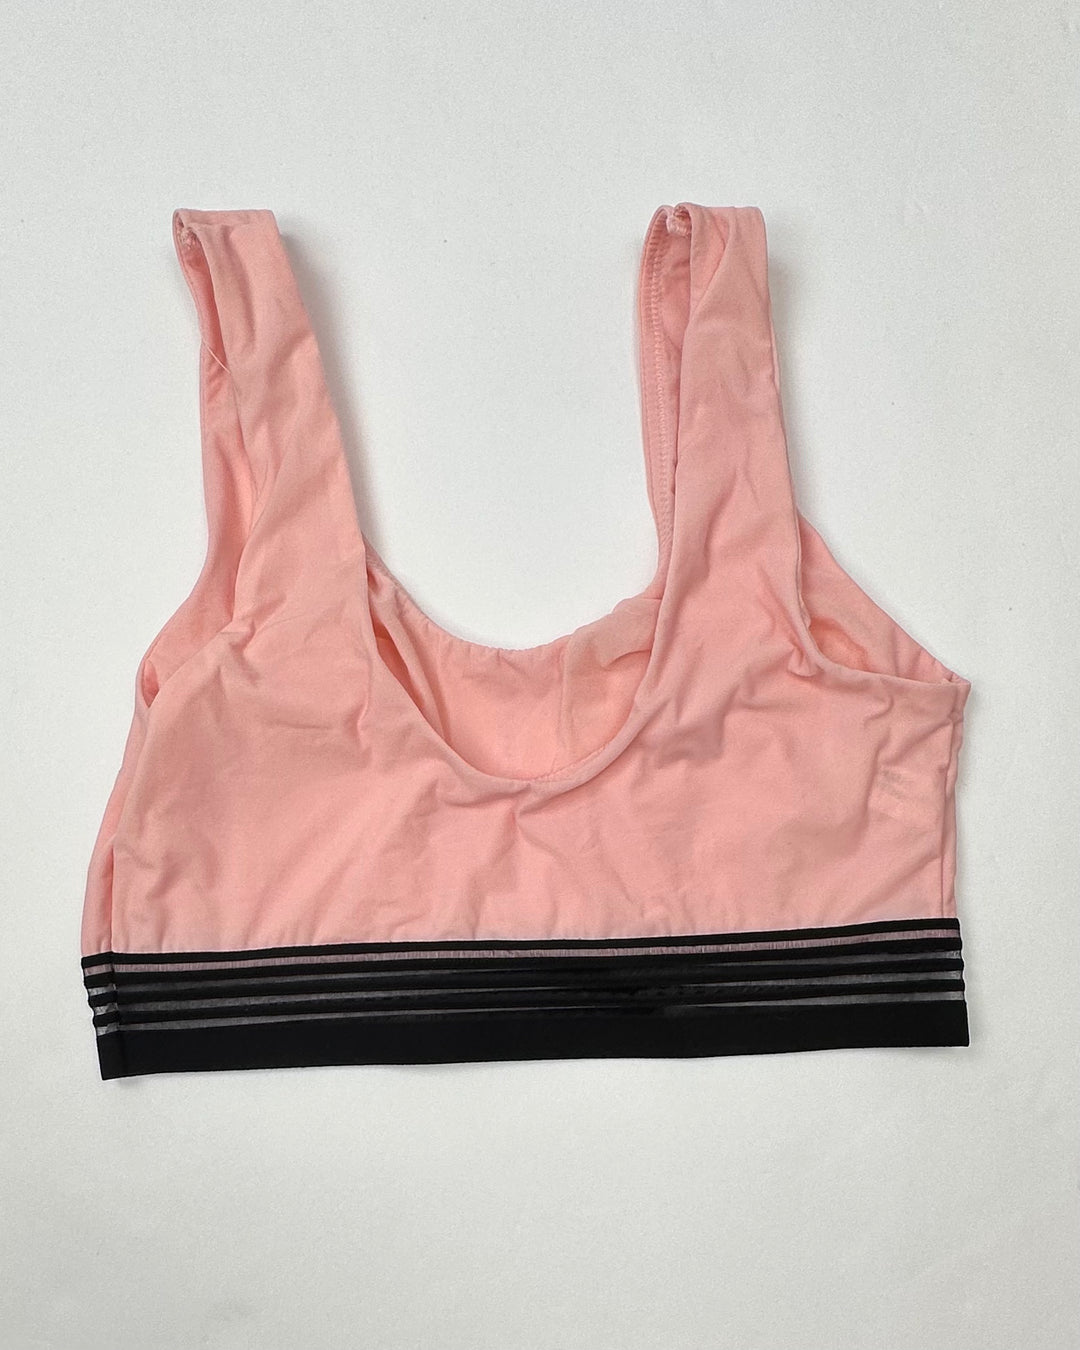 Pink Bralette - Small, Medium And Large